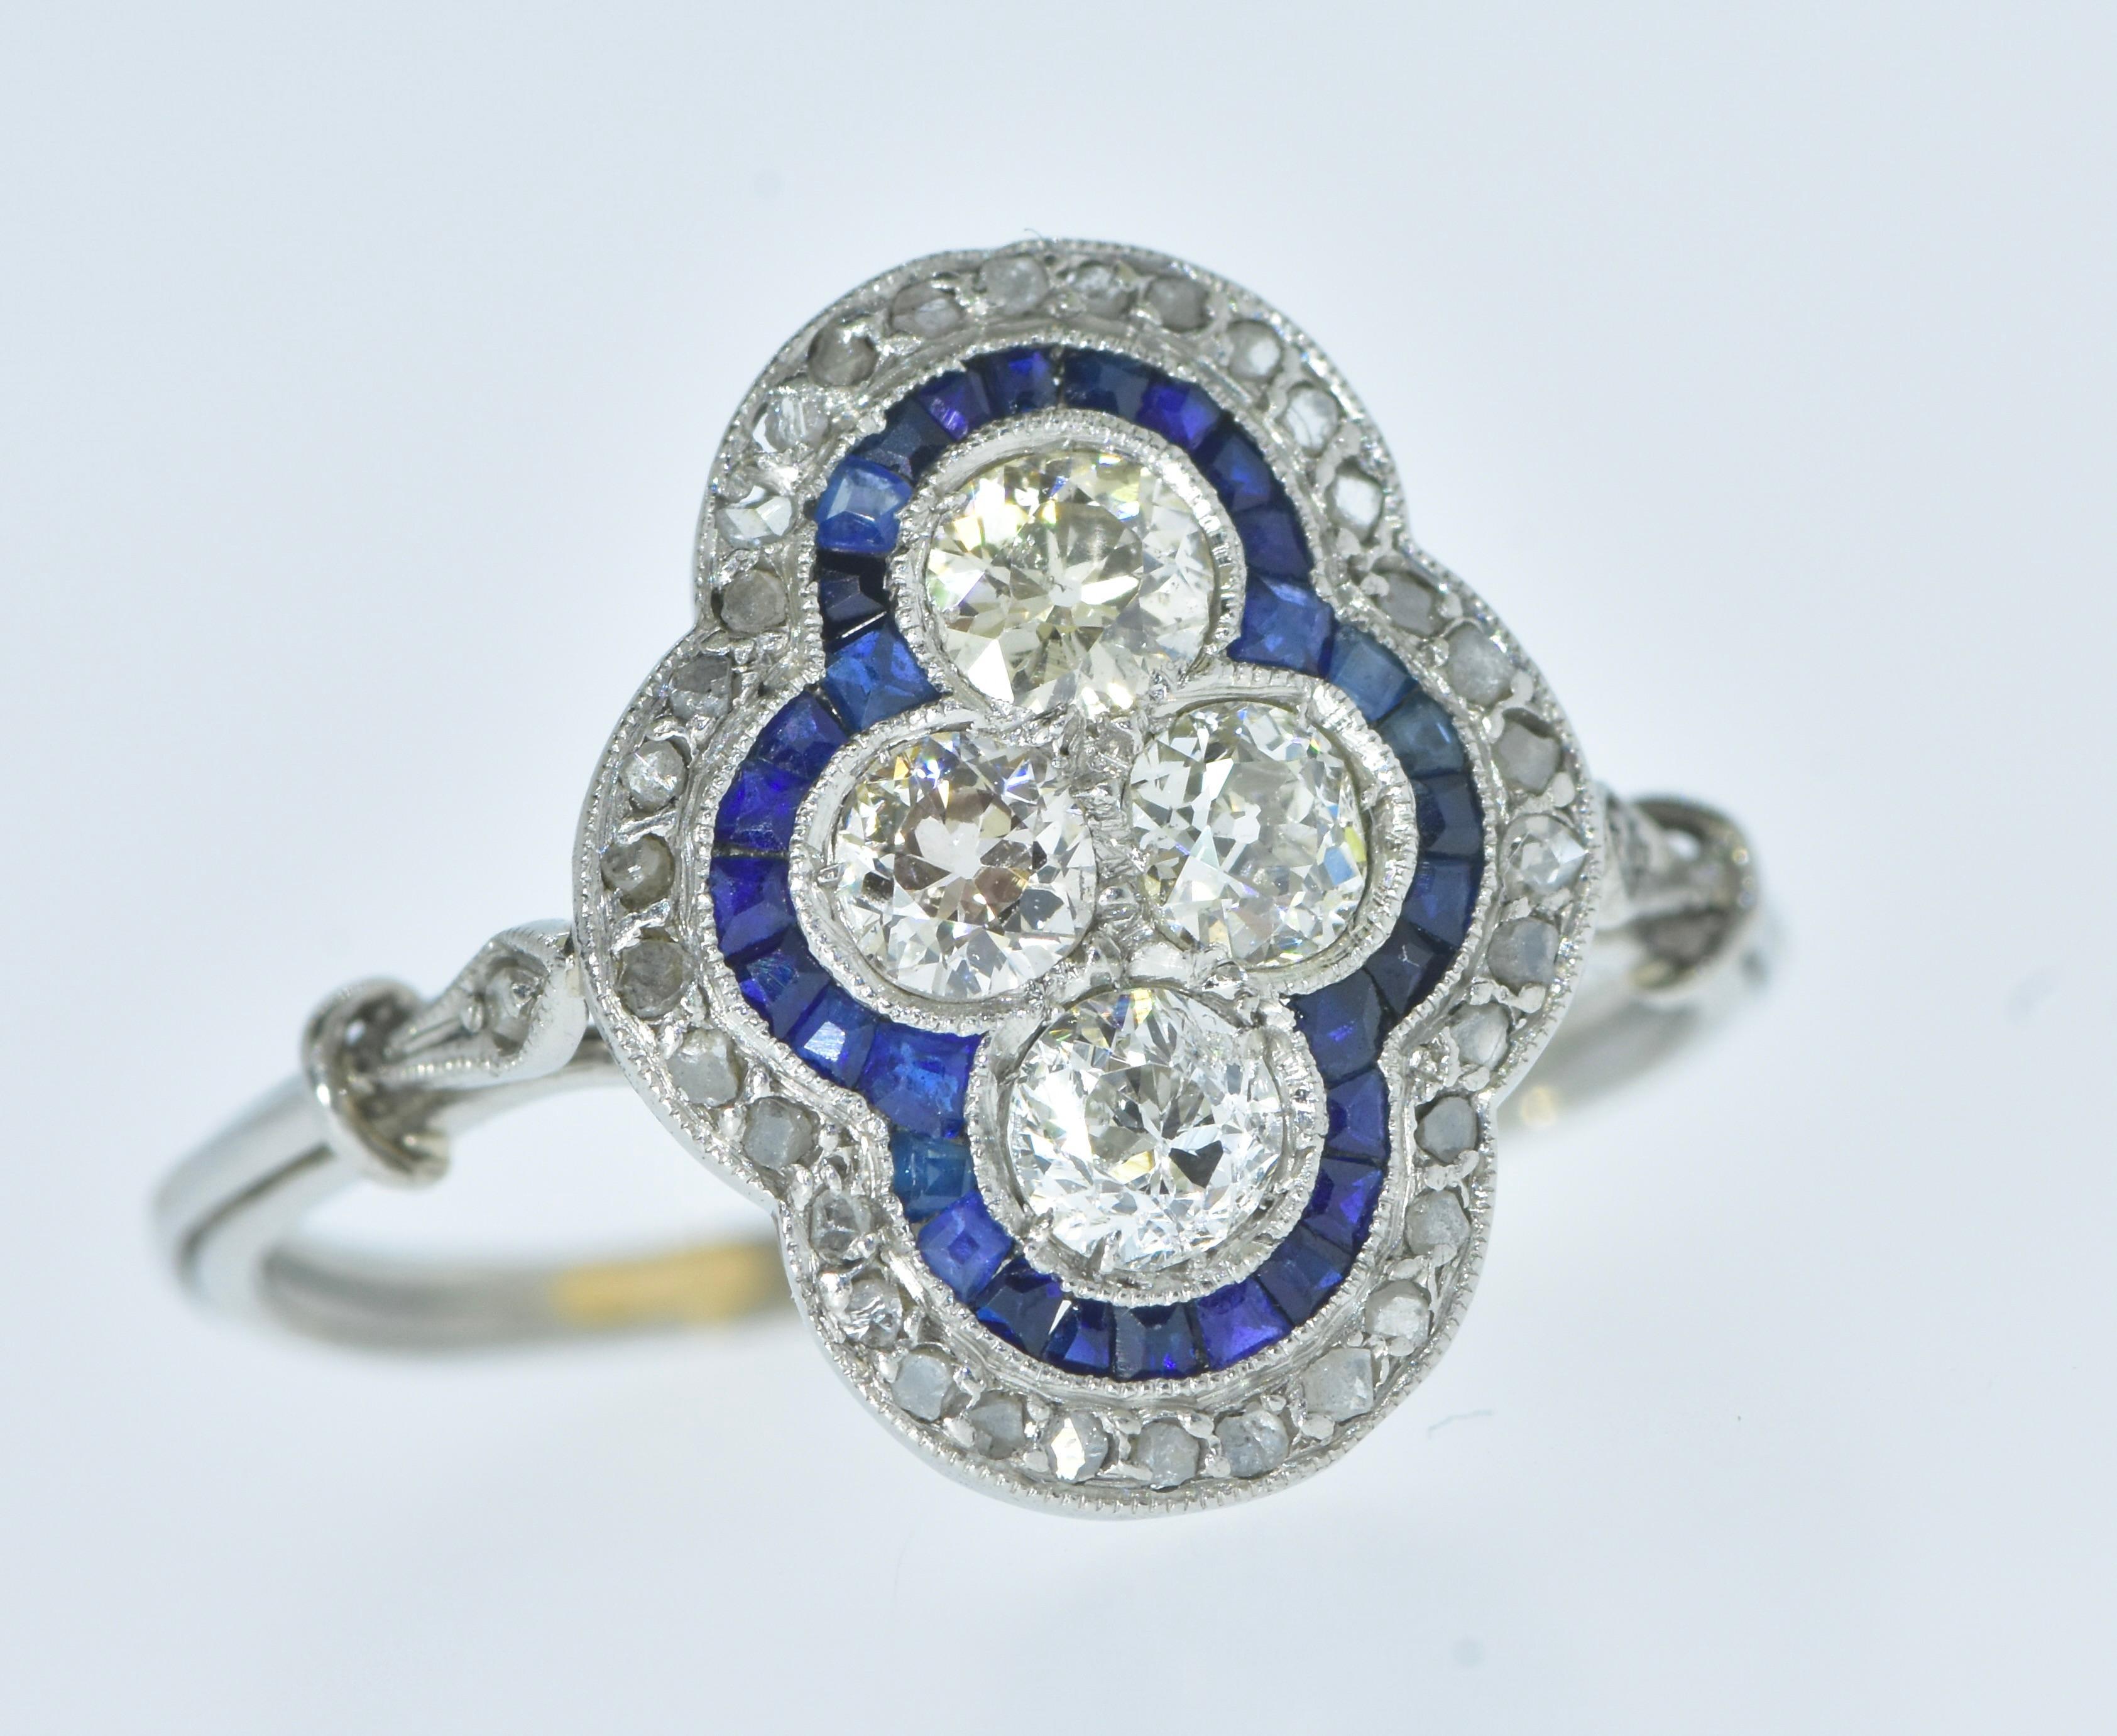 Antique Edwardian Diamond and Sapphire Ring in excellent condition, circa 1915 For Sale 2